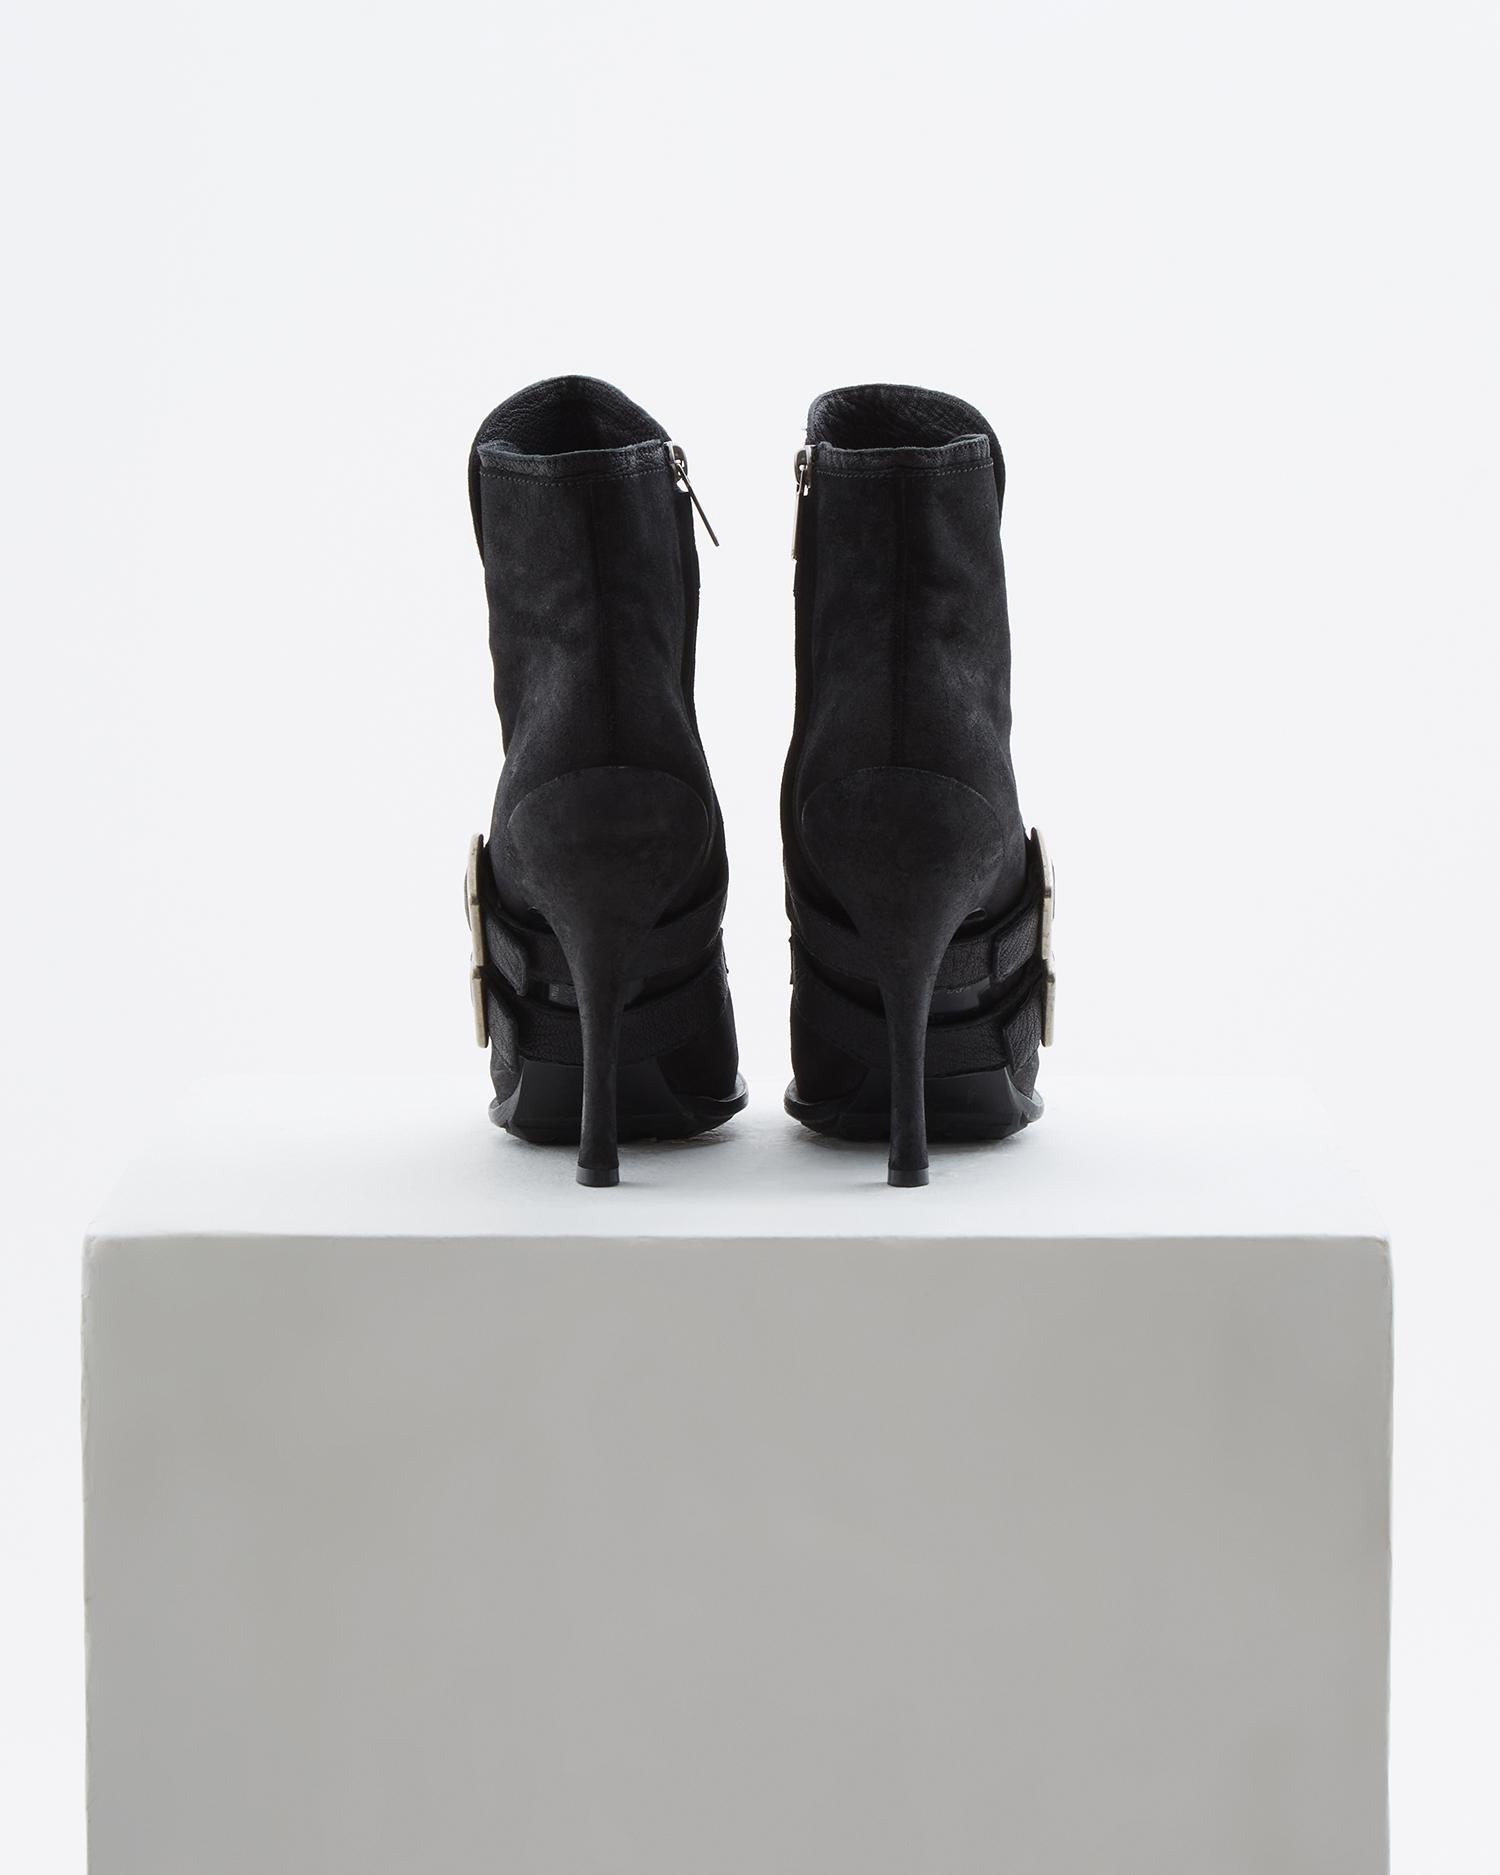 Christian Dior by John Galliano S/S 2010 Black leather ankle boots  In Excellent Condition For Sale In Milano, IT